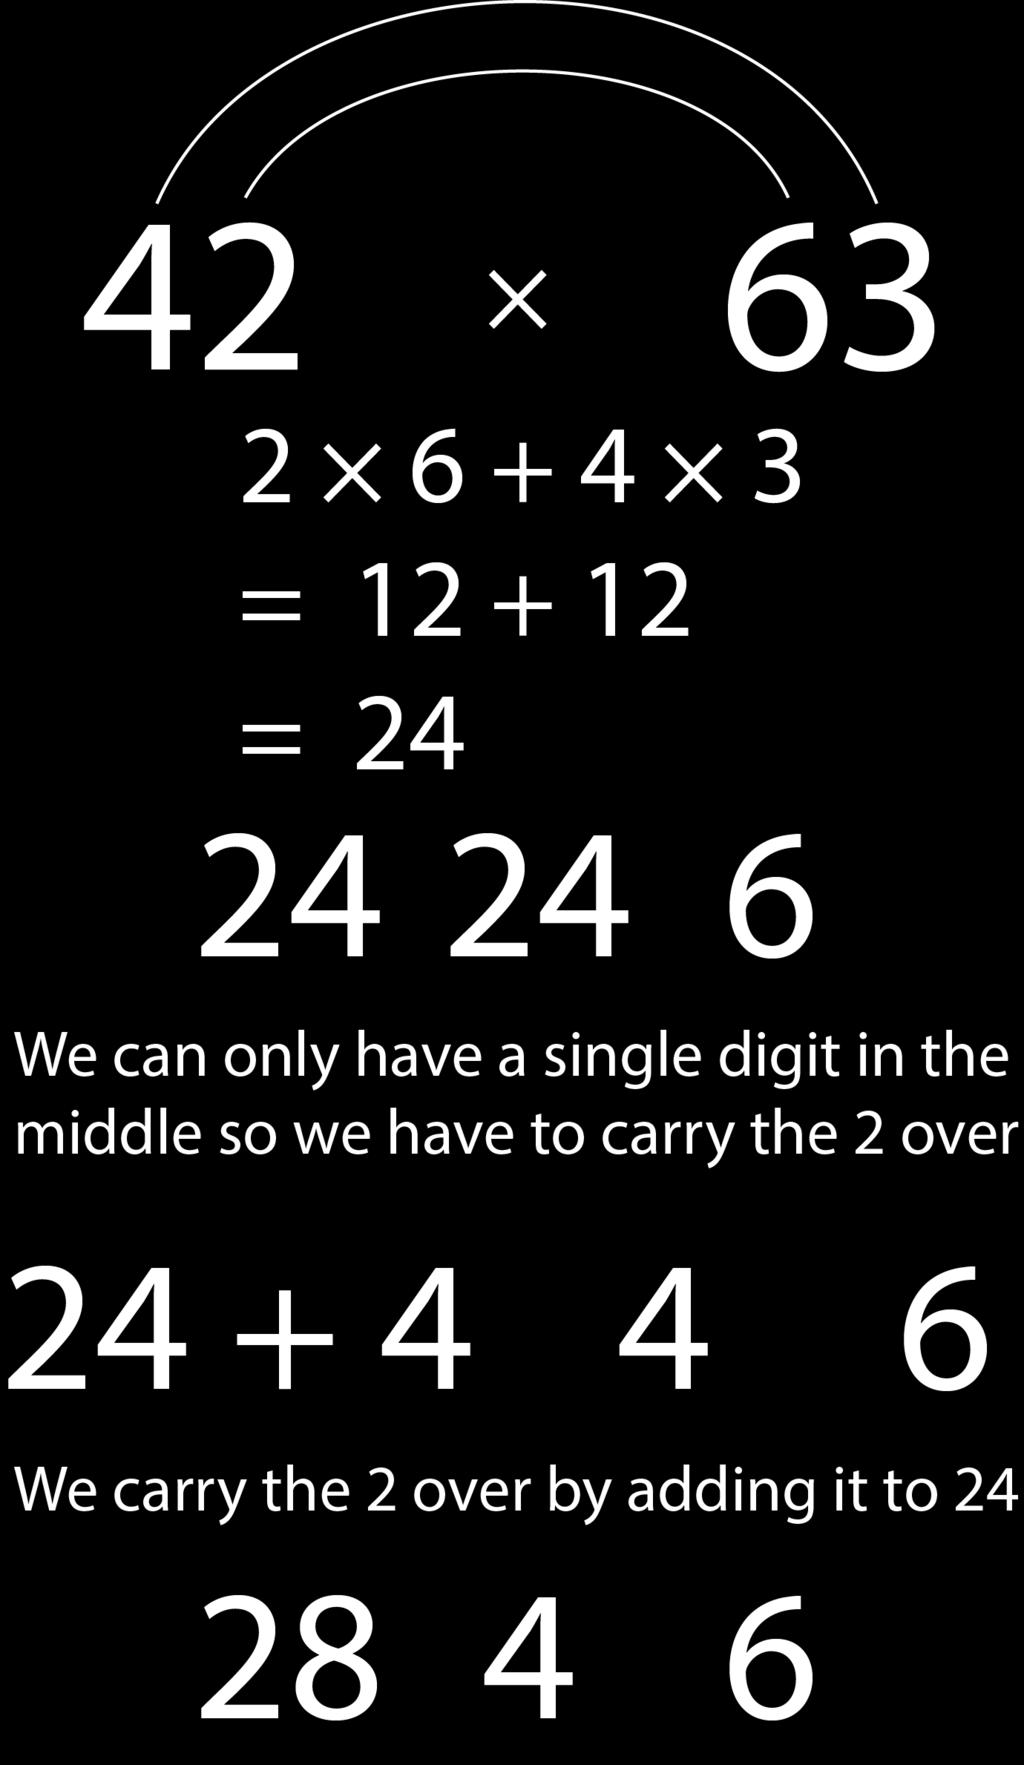 Multiply the inner digits and outer digits of the two numbers and add them 4 3 + 2 26 = 12 + 12 = 24 Place the sum between